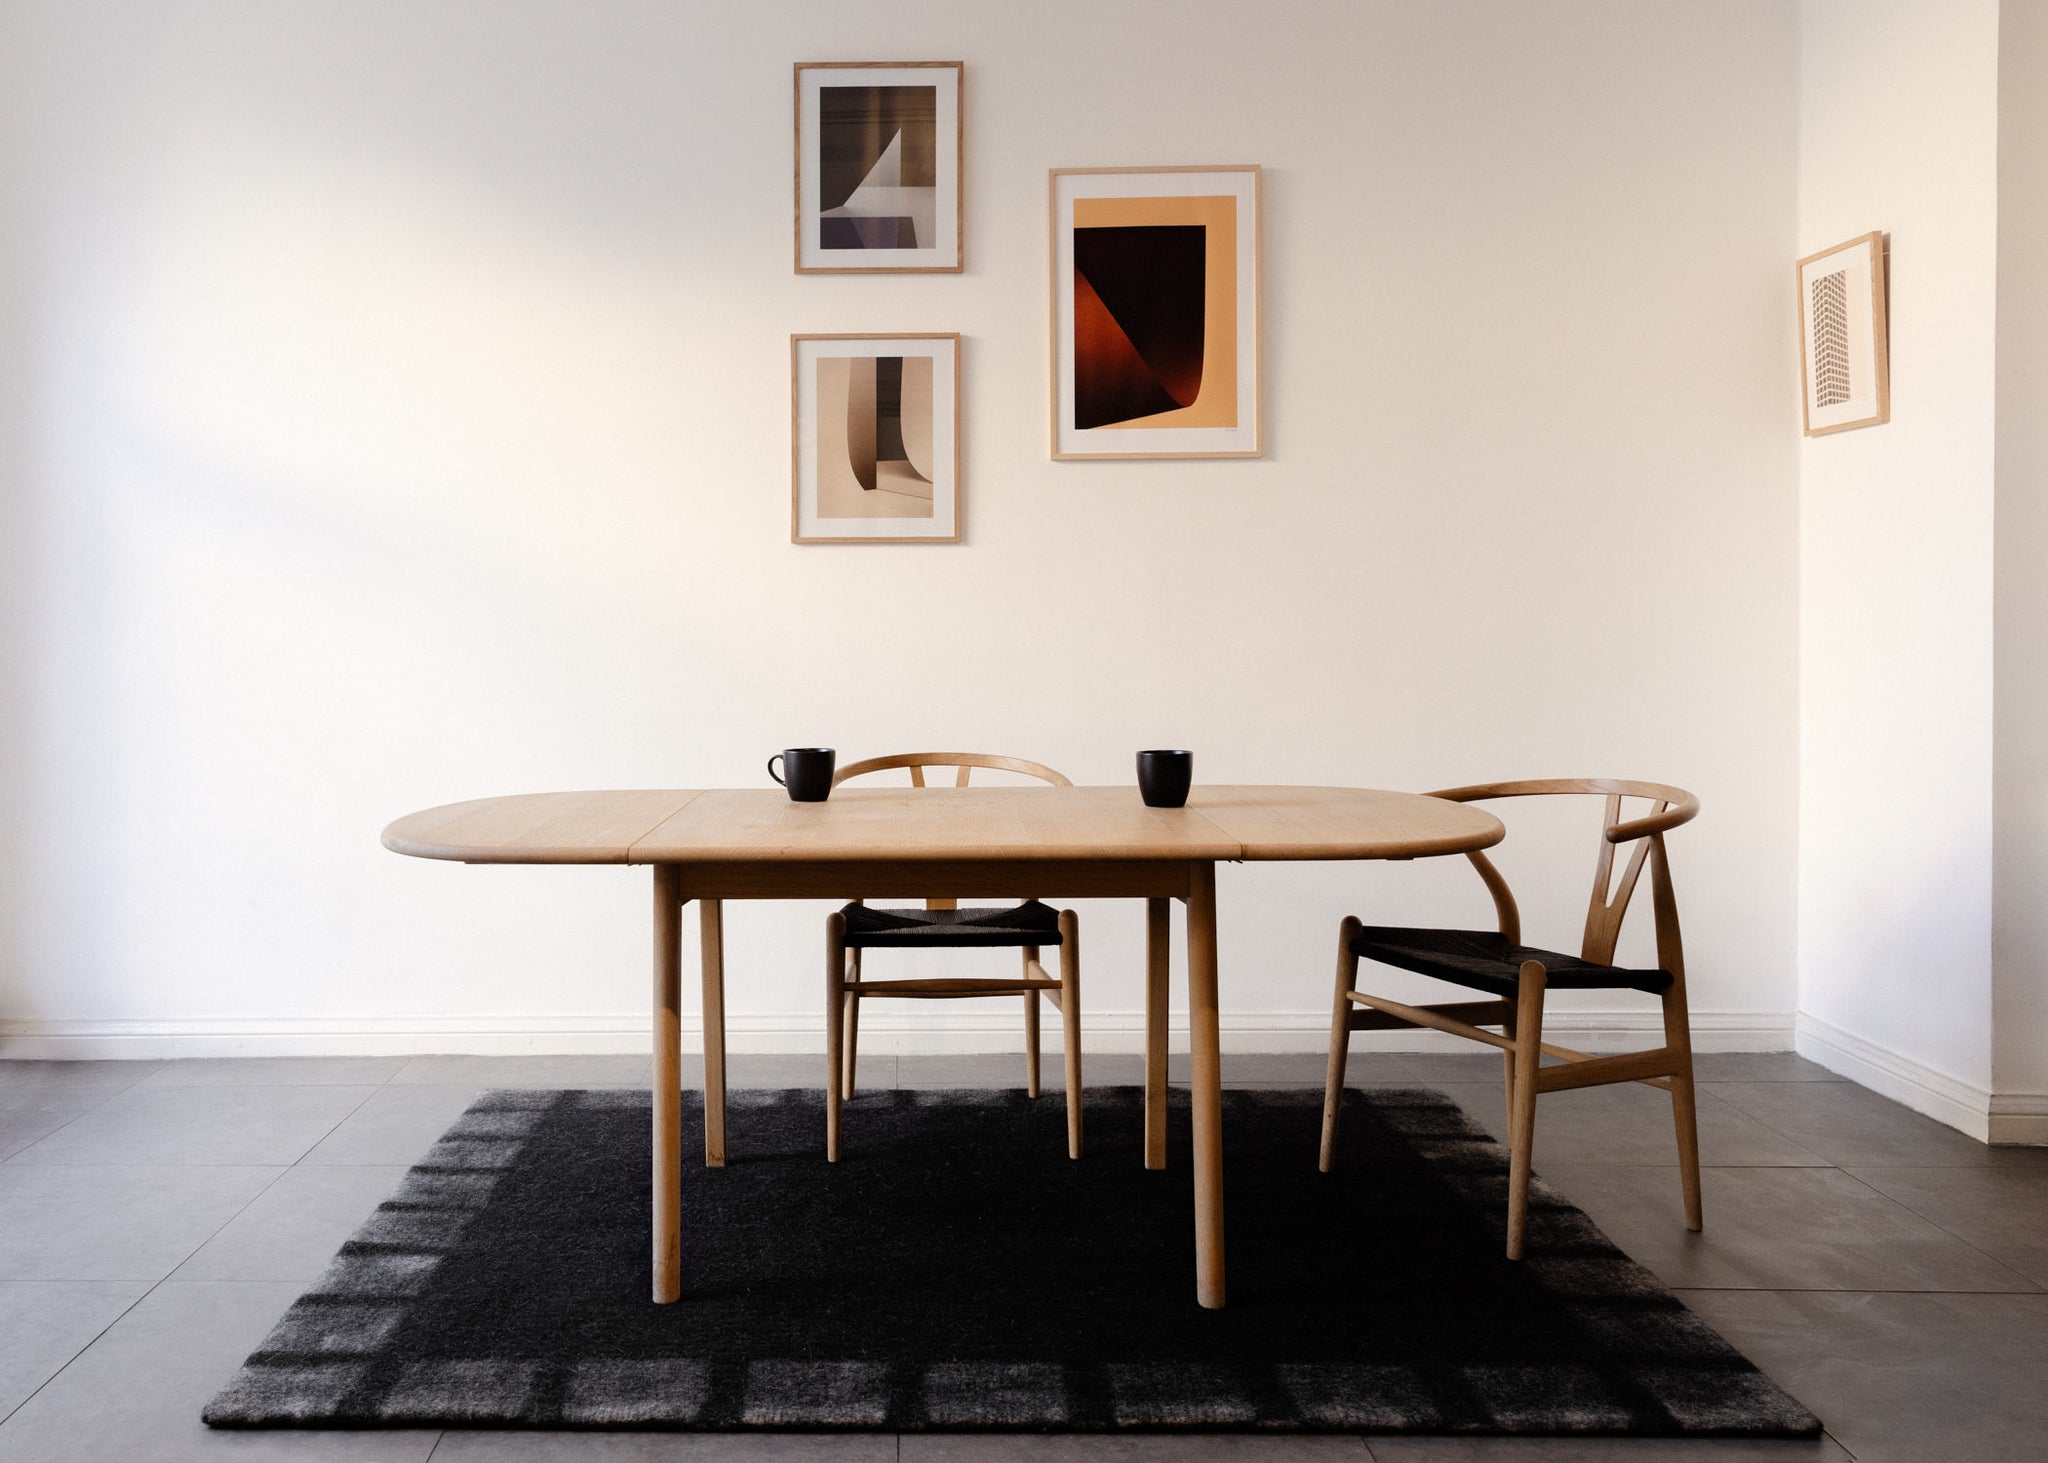 New collection launched during Stockholm Design Week